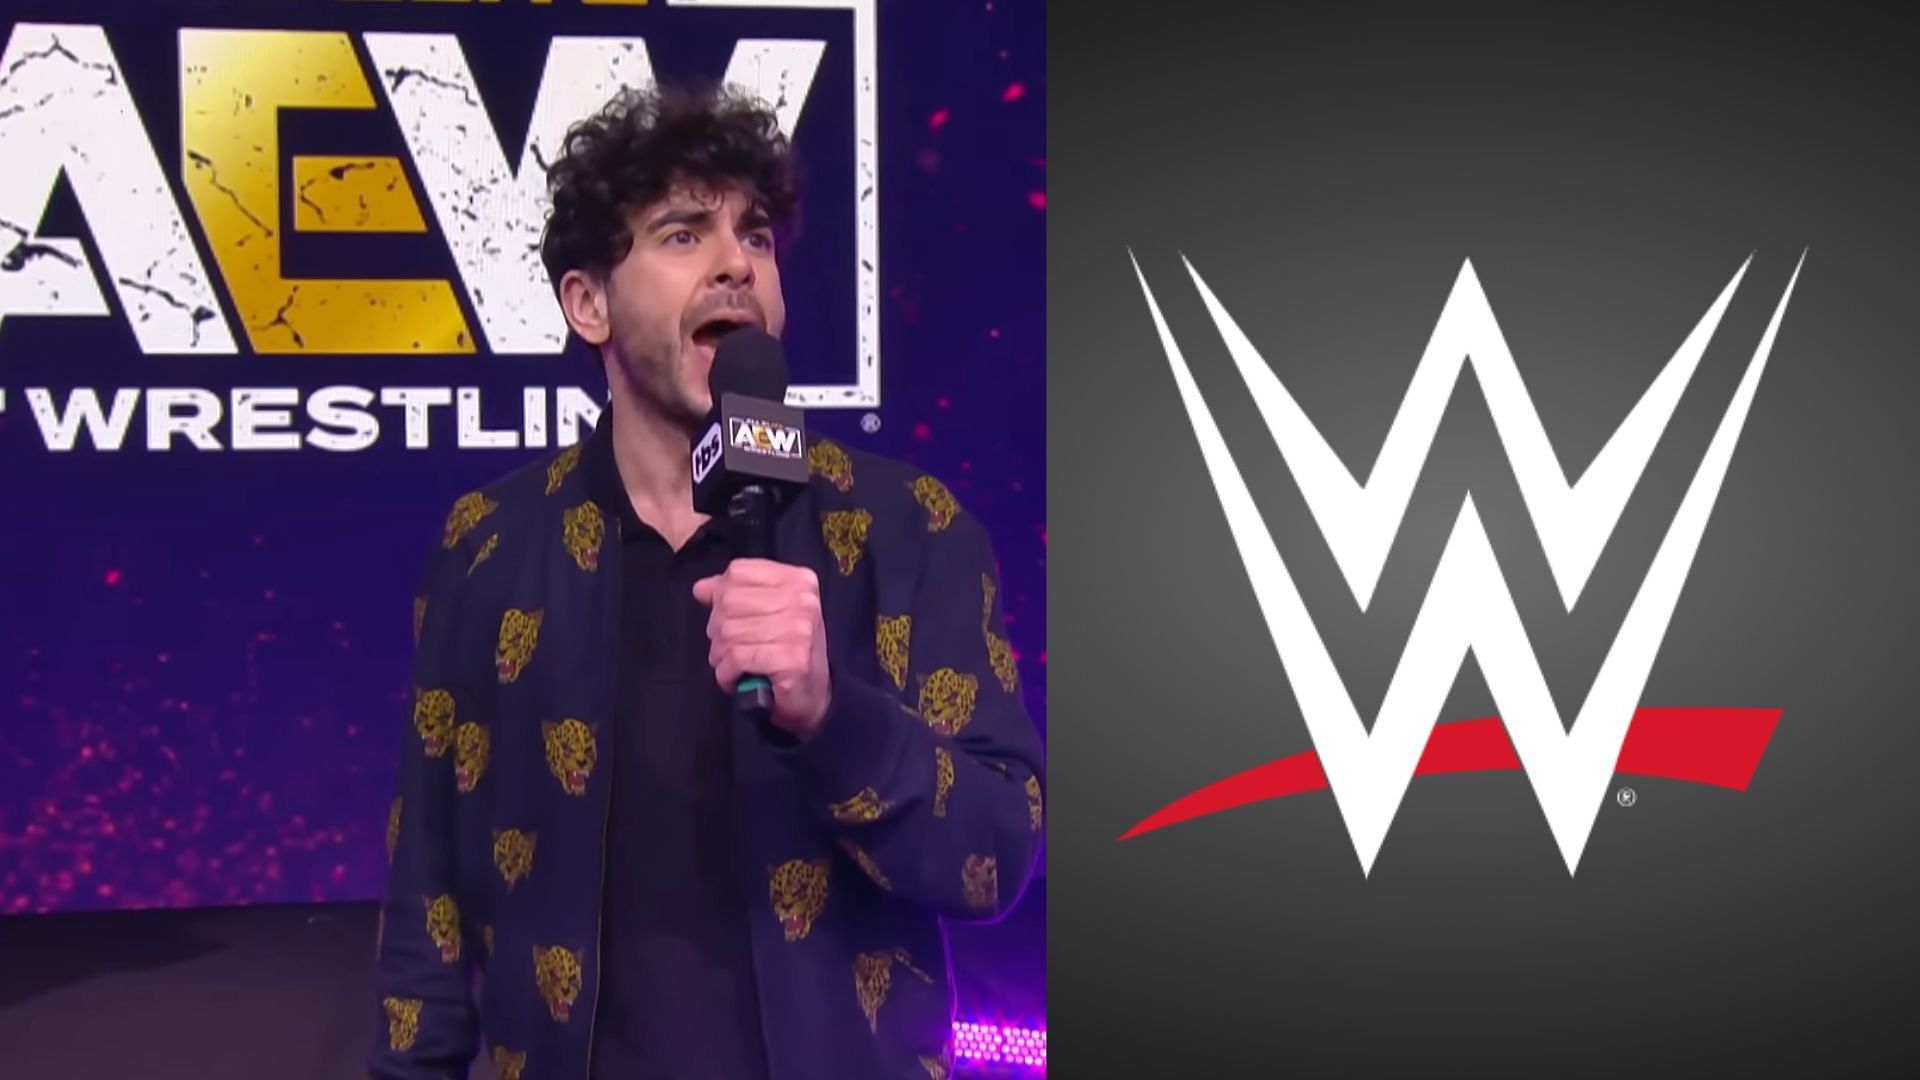 Tony Khan is the CEO and Creative Head of AEW